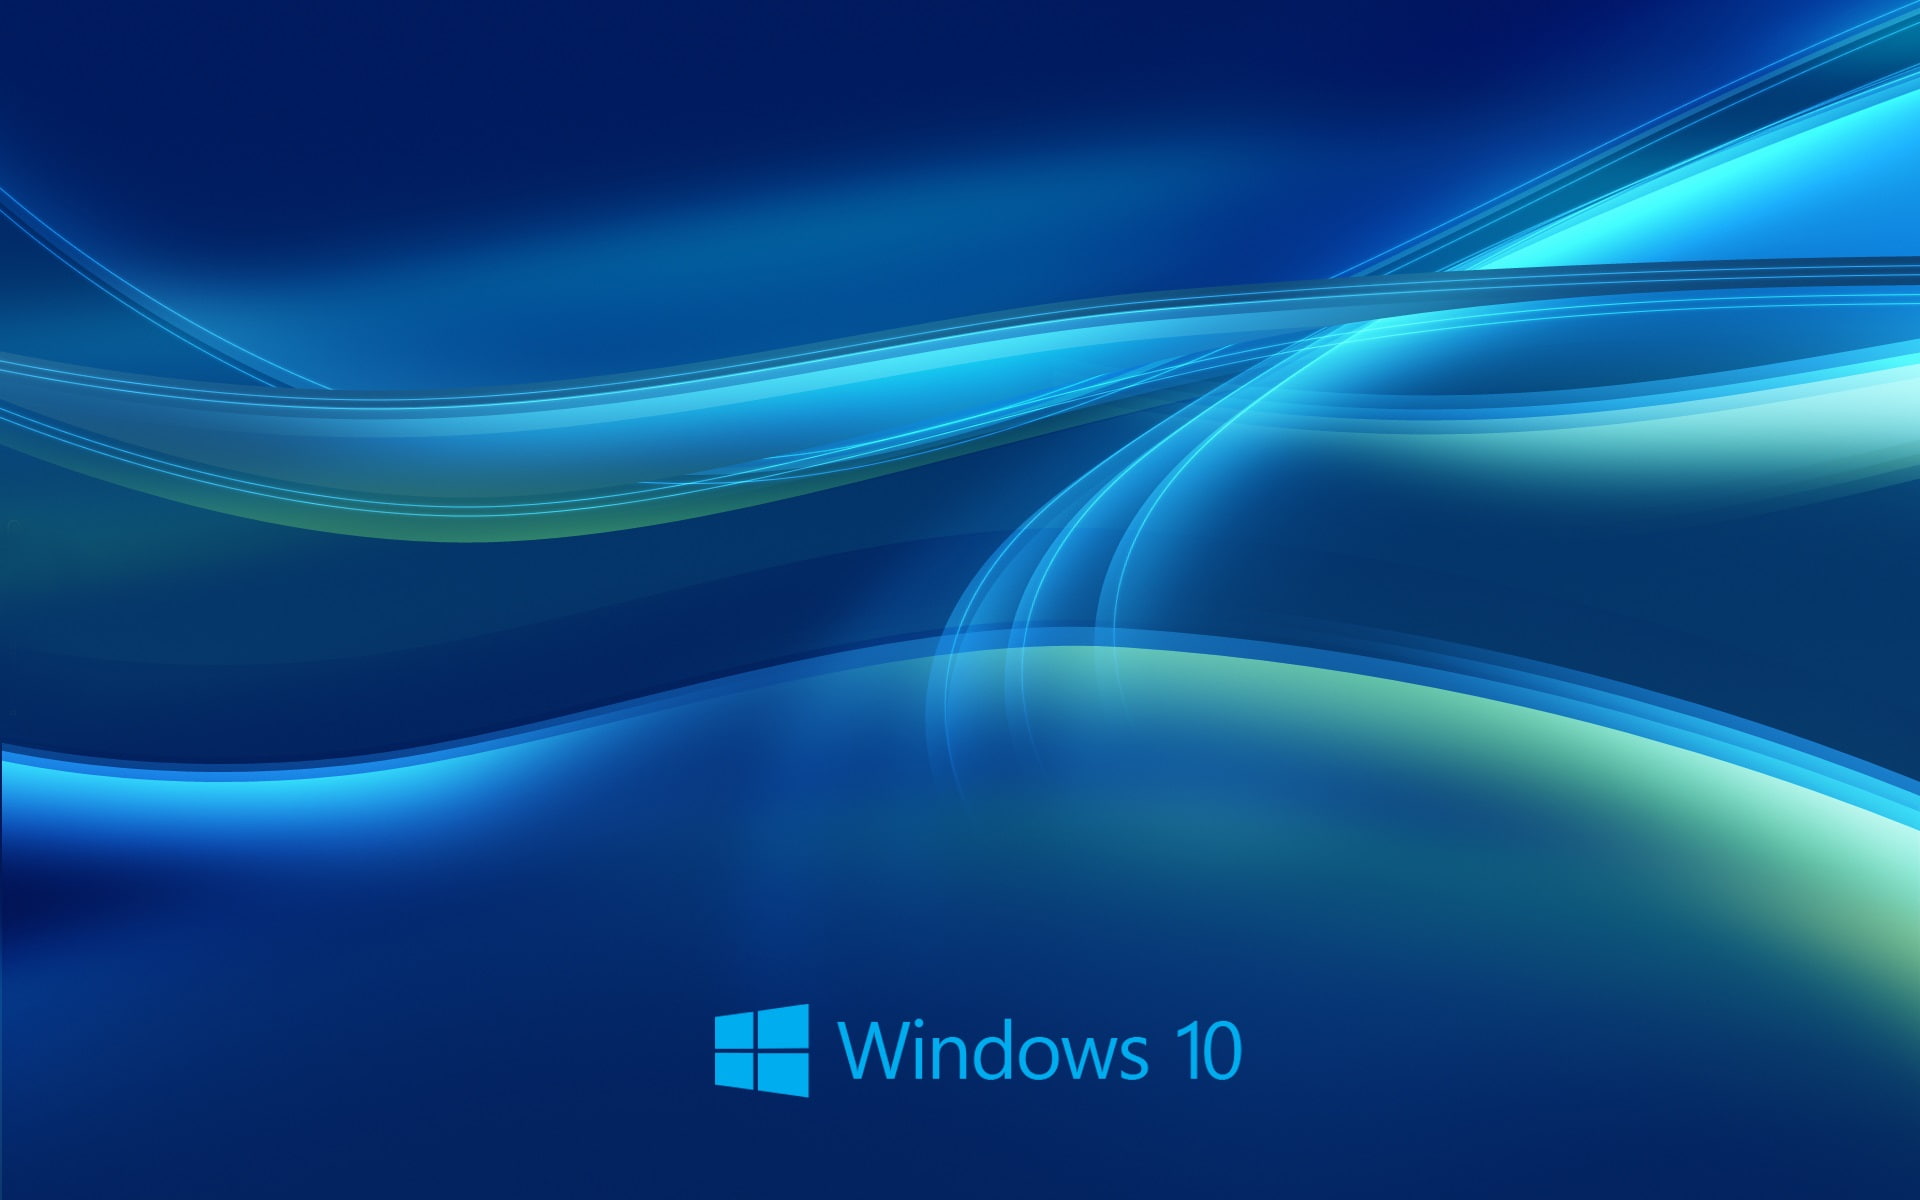 Windows 10 system, abstract blue background